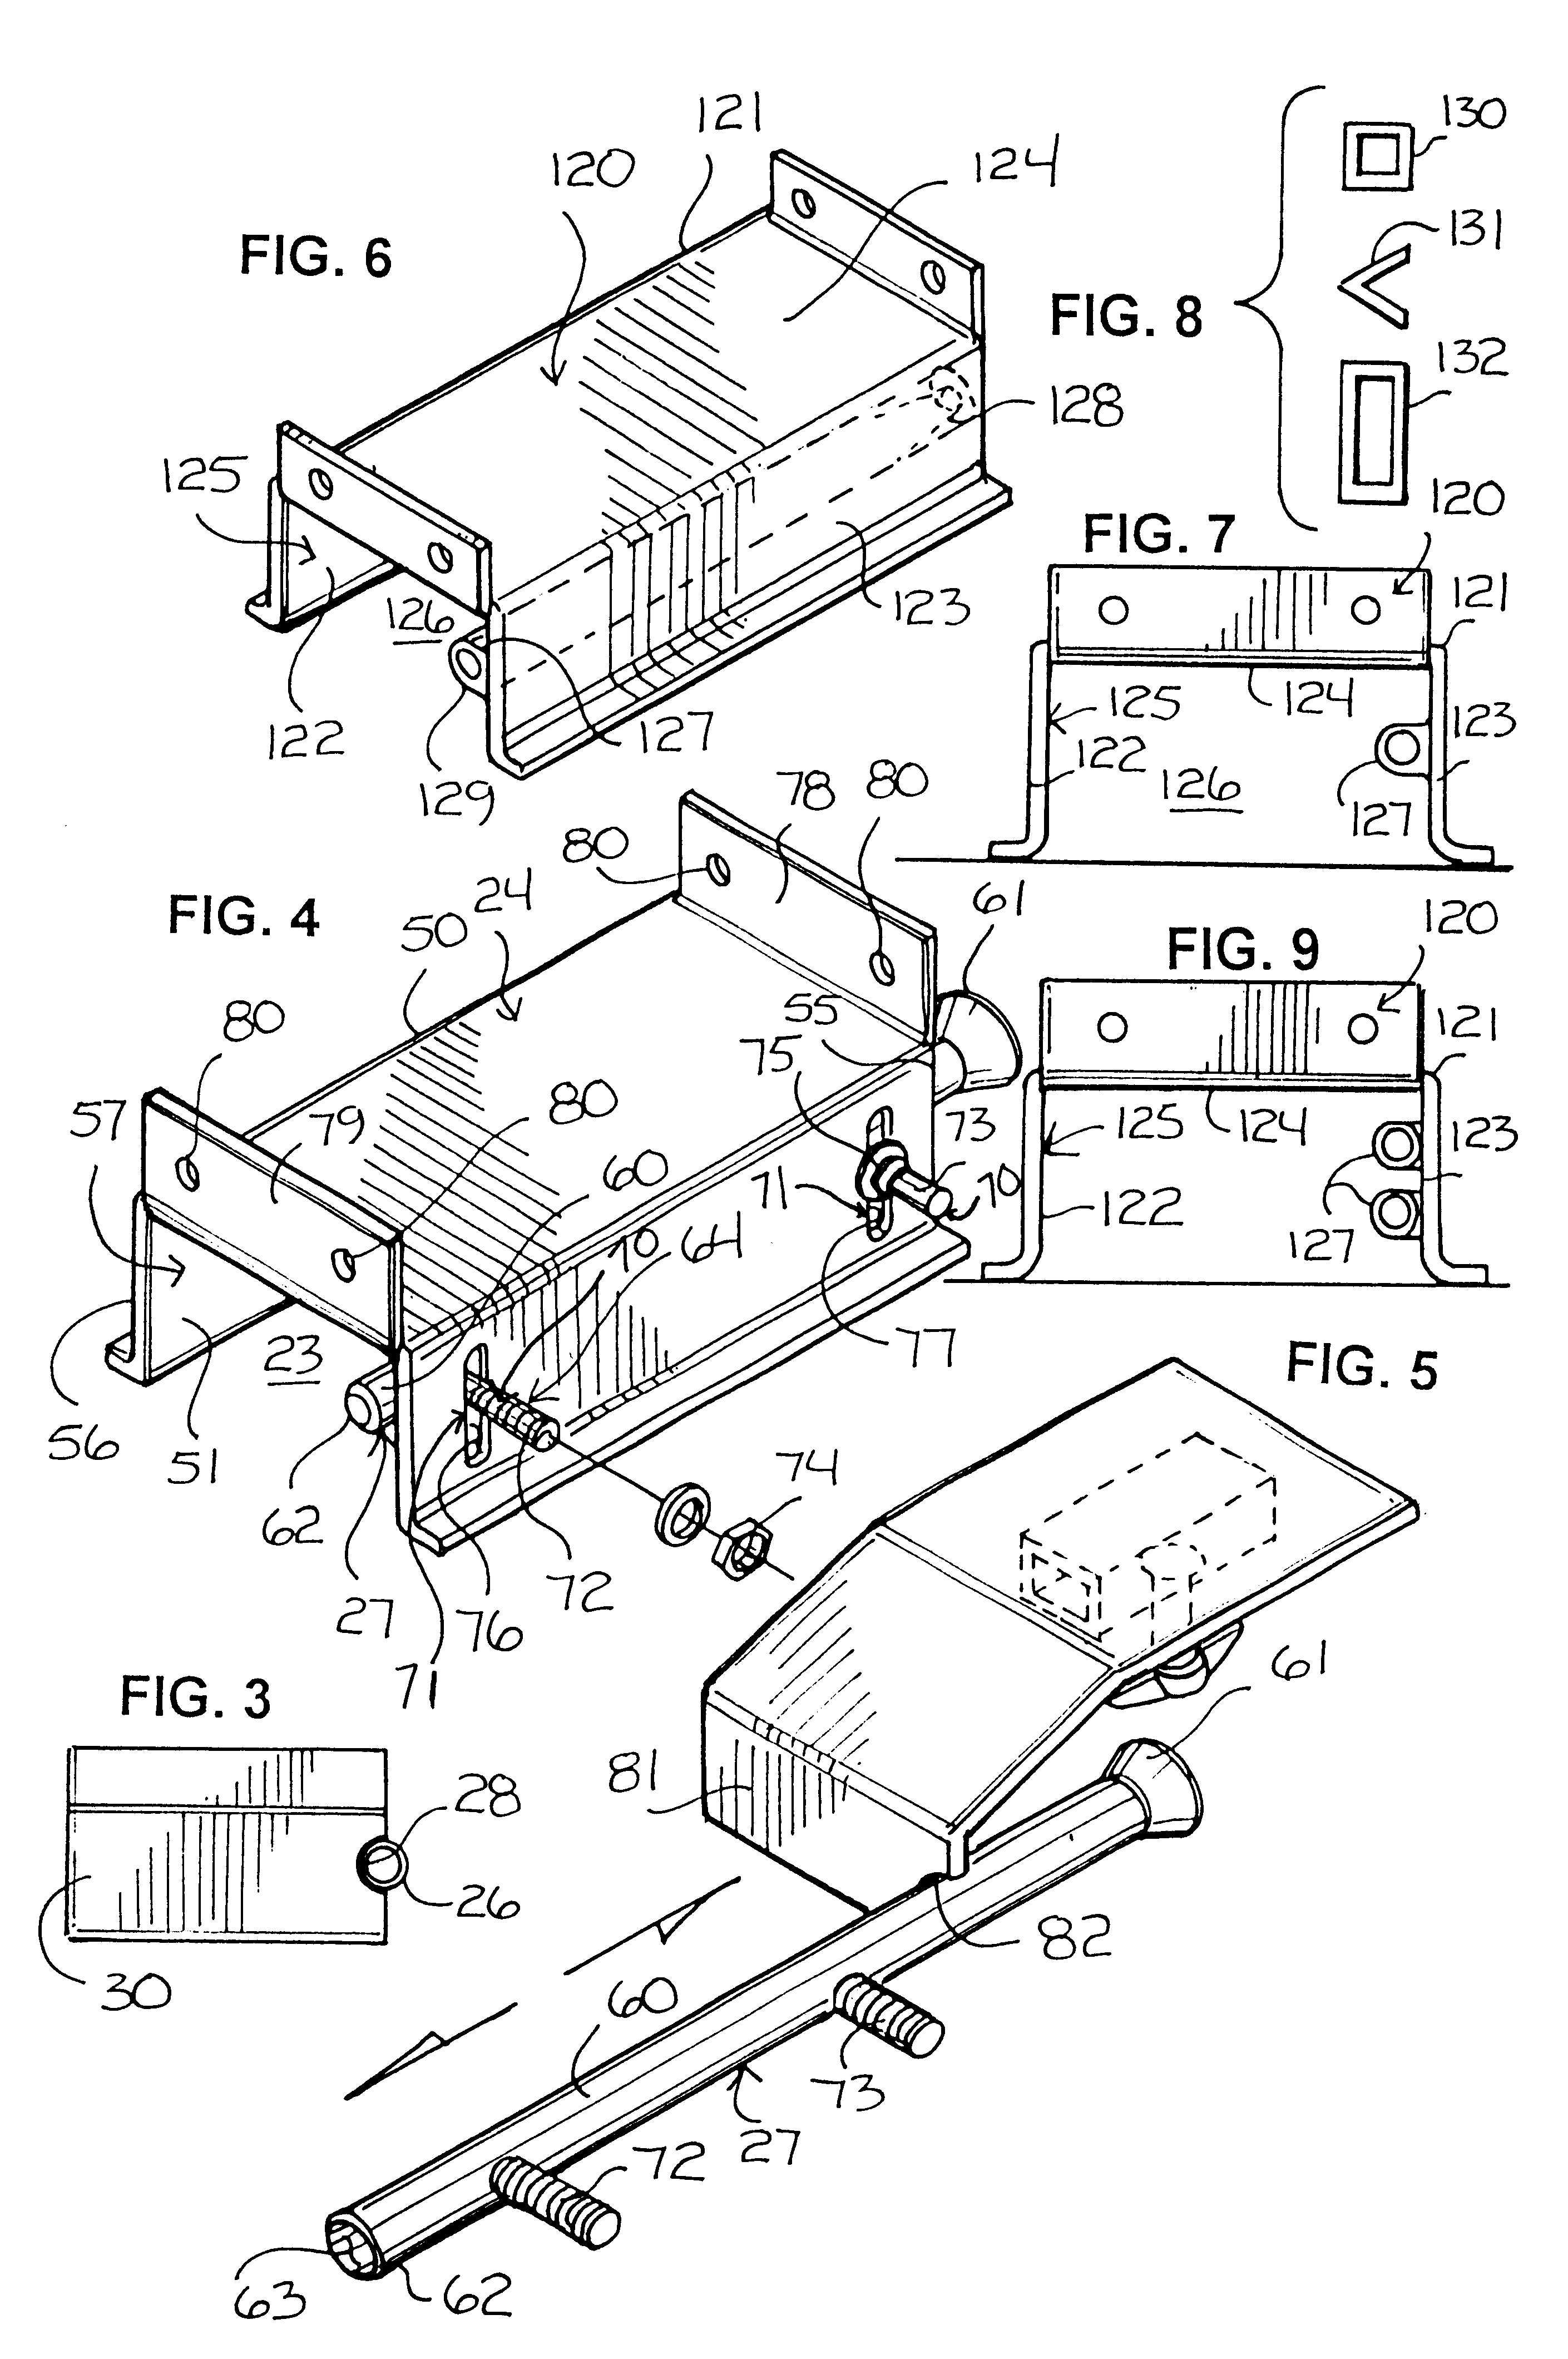 Curb forming apparatus and method